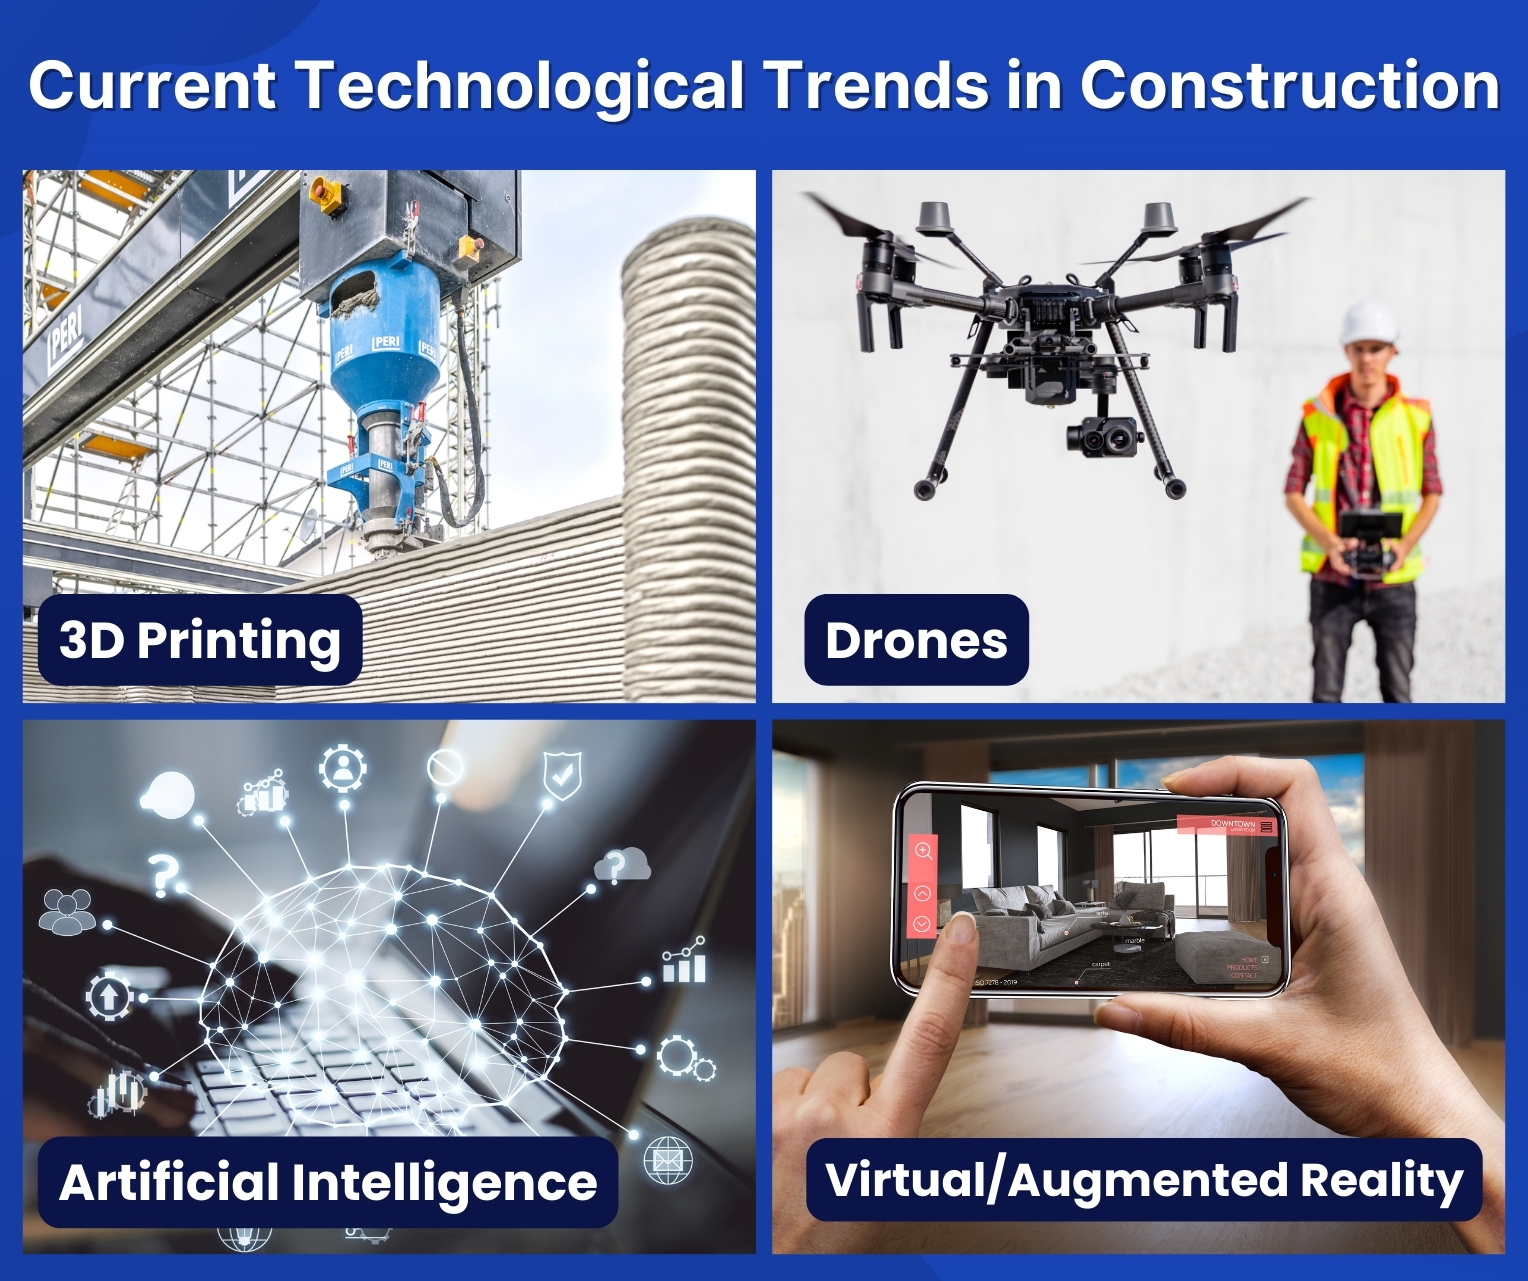 Current Technological Trends in Construction
